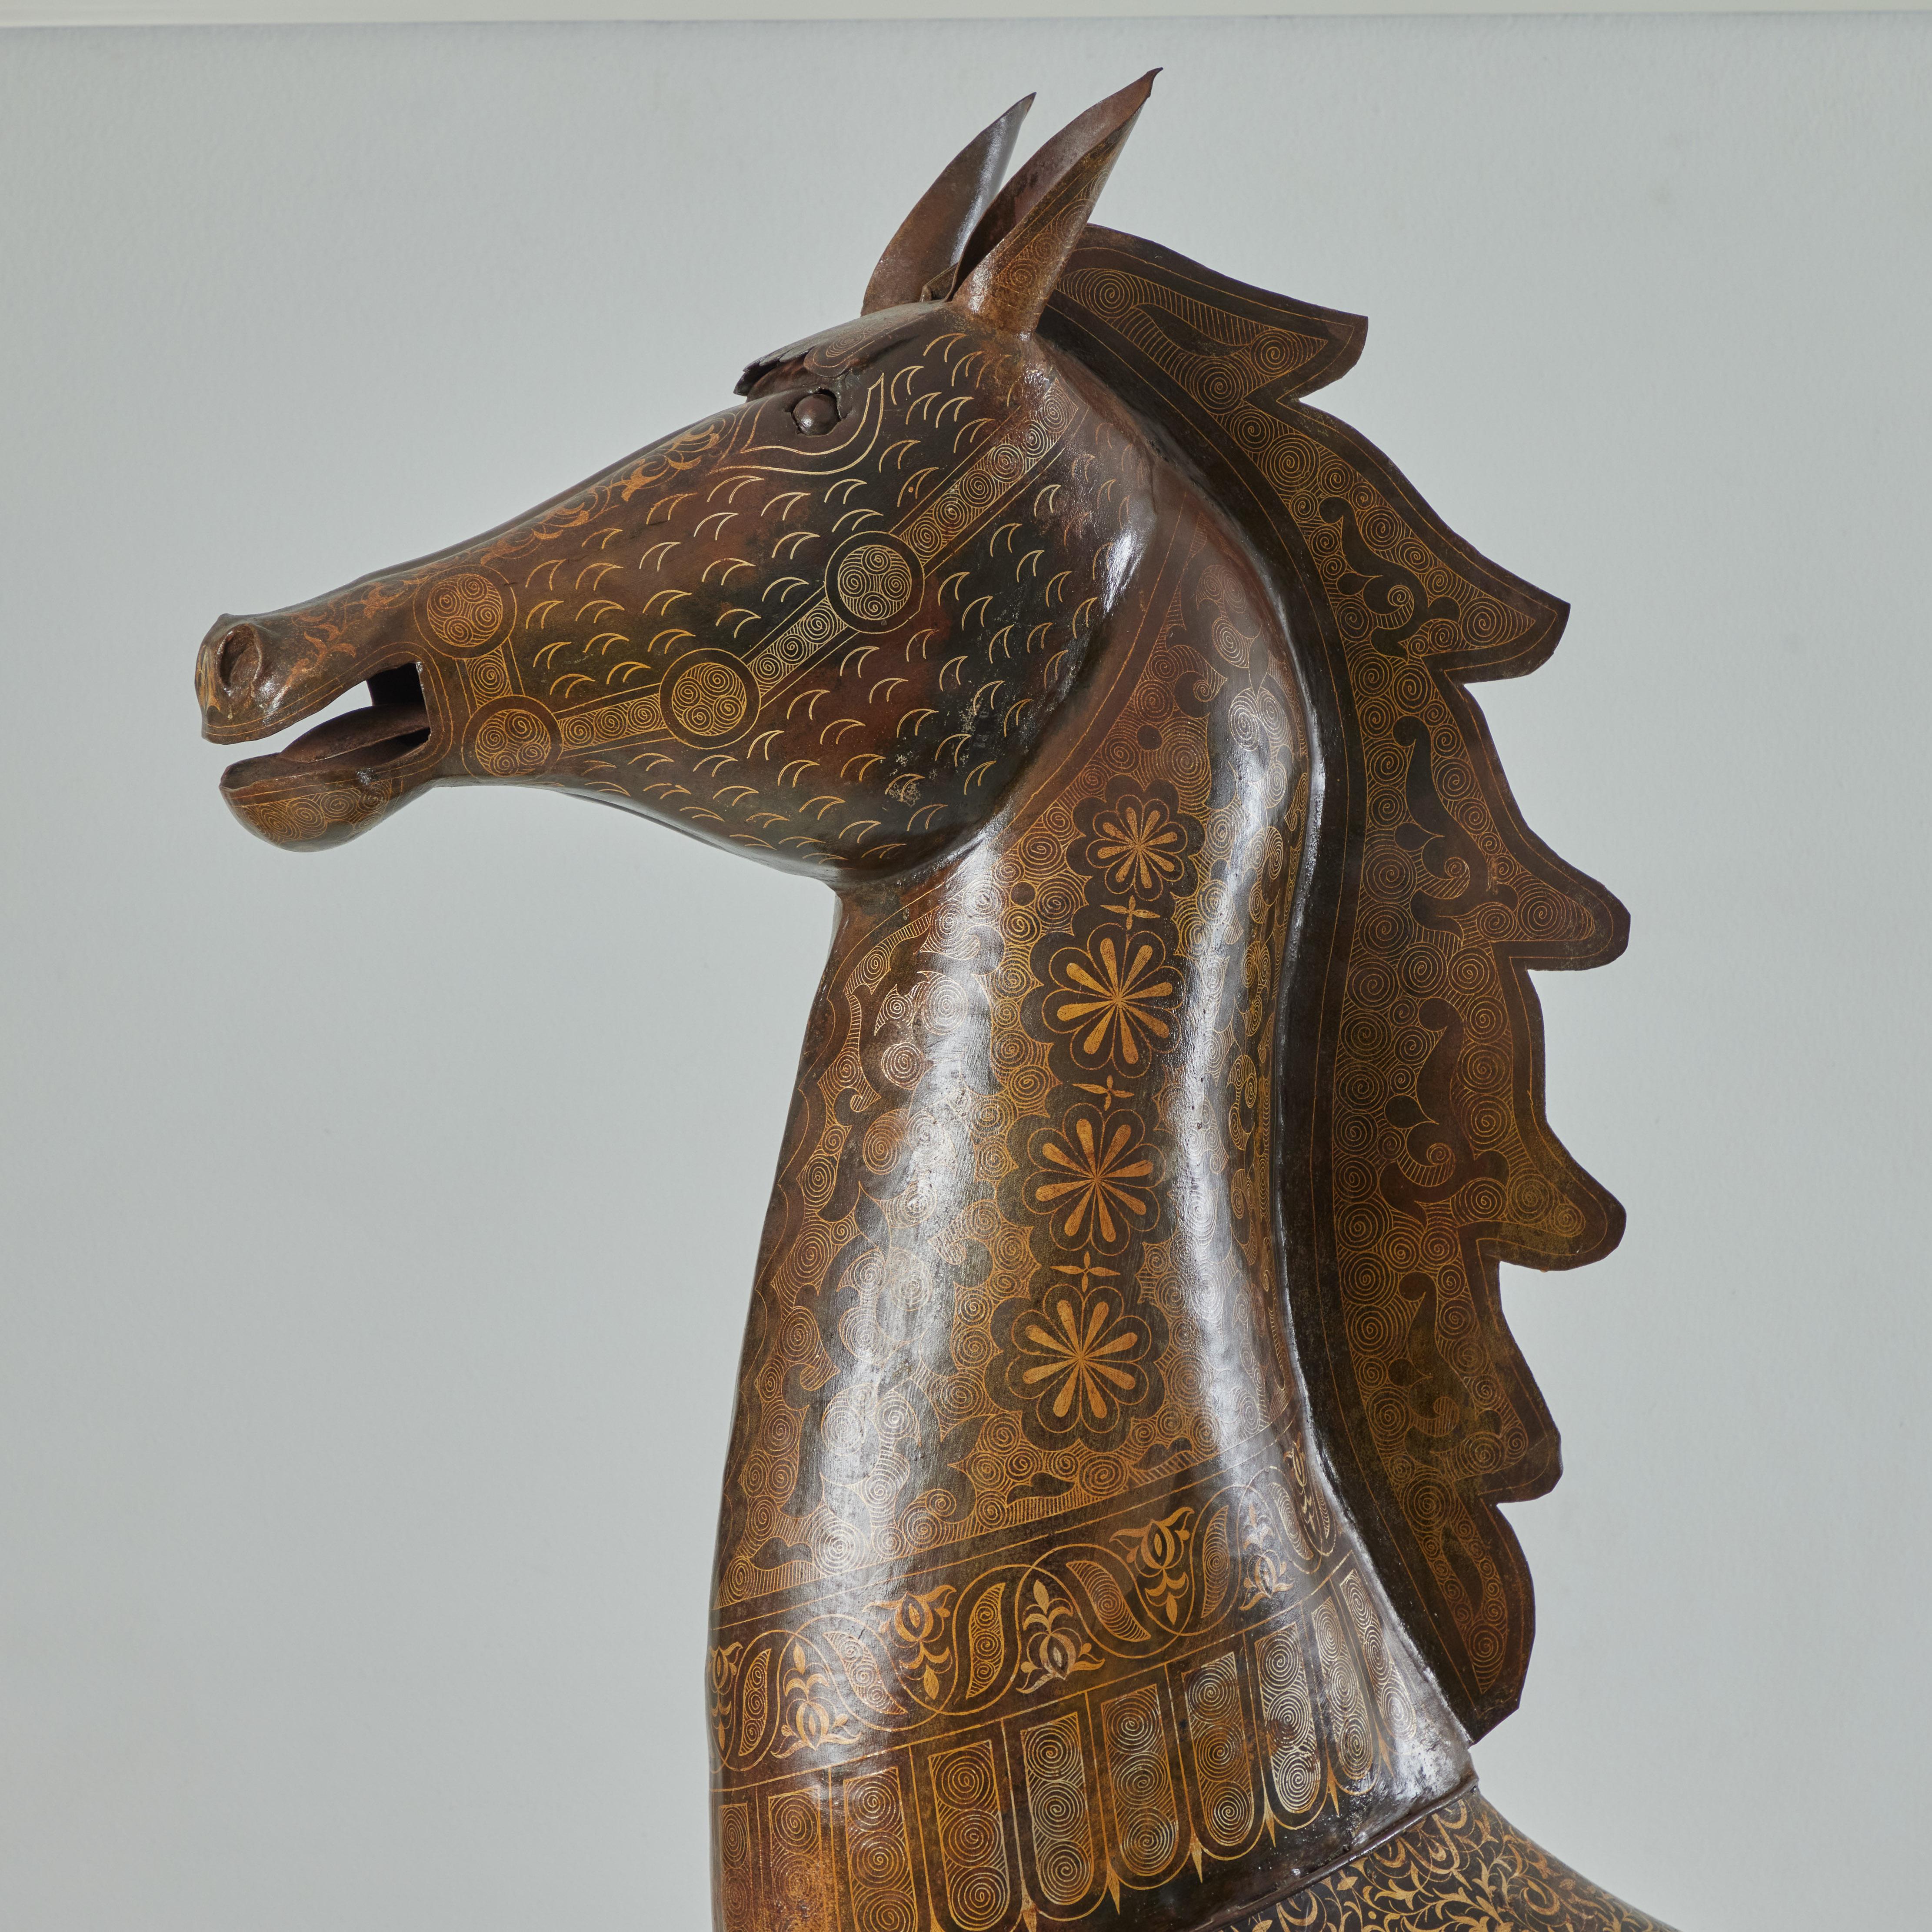 This is a majestic life size metal horse with hand embellishment. The head and the legs are welded on to the body. Standing steadily and tall, the horse has been hand embellished with gold that has been embedded in the metal. An intricate design